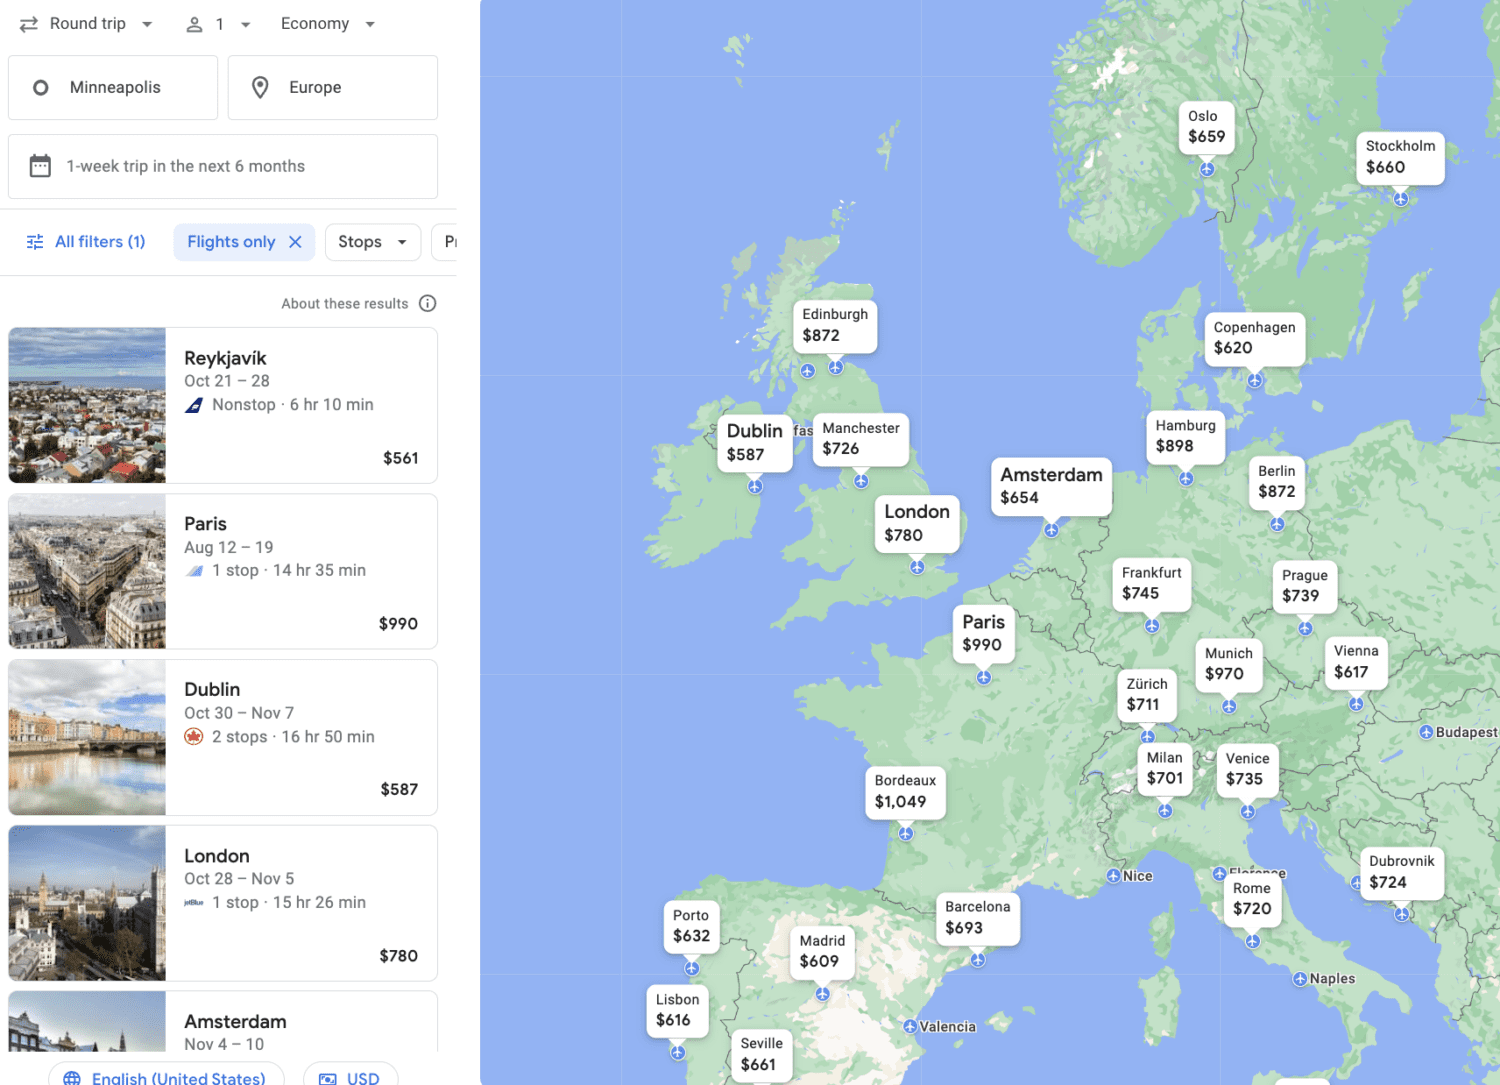 Google Flights Explore search for flights from Minneapolis to Europe in the next six months